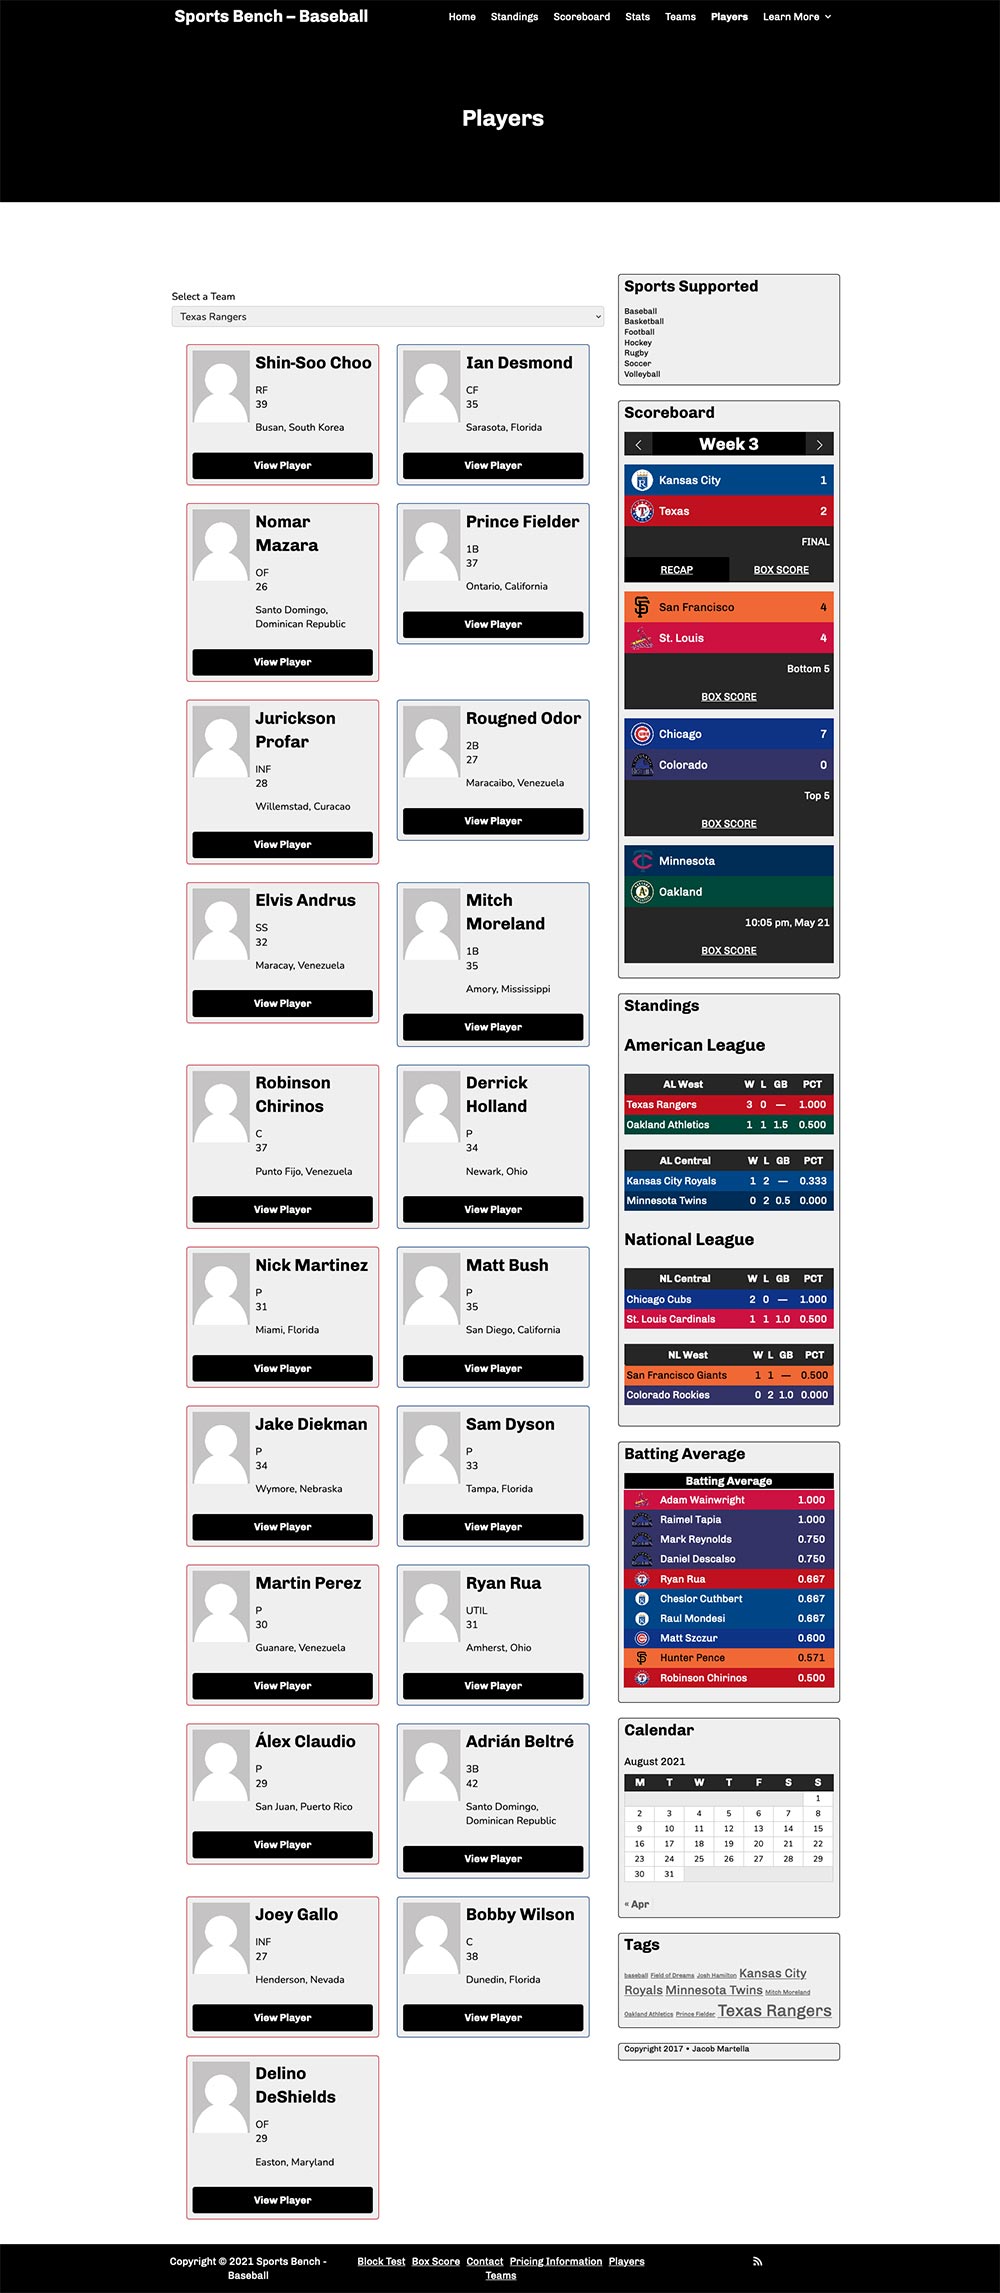 Screenshot of the baseball players page in Sports Bench